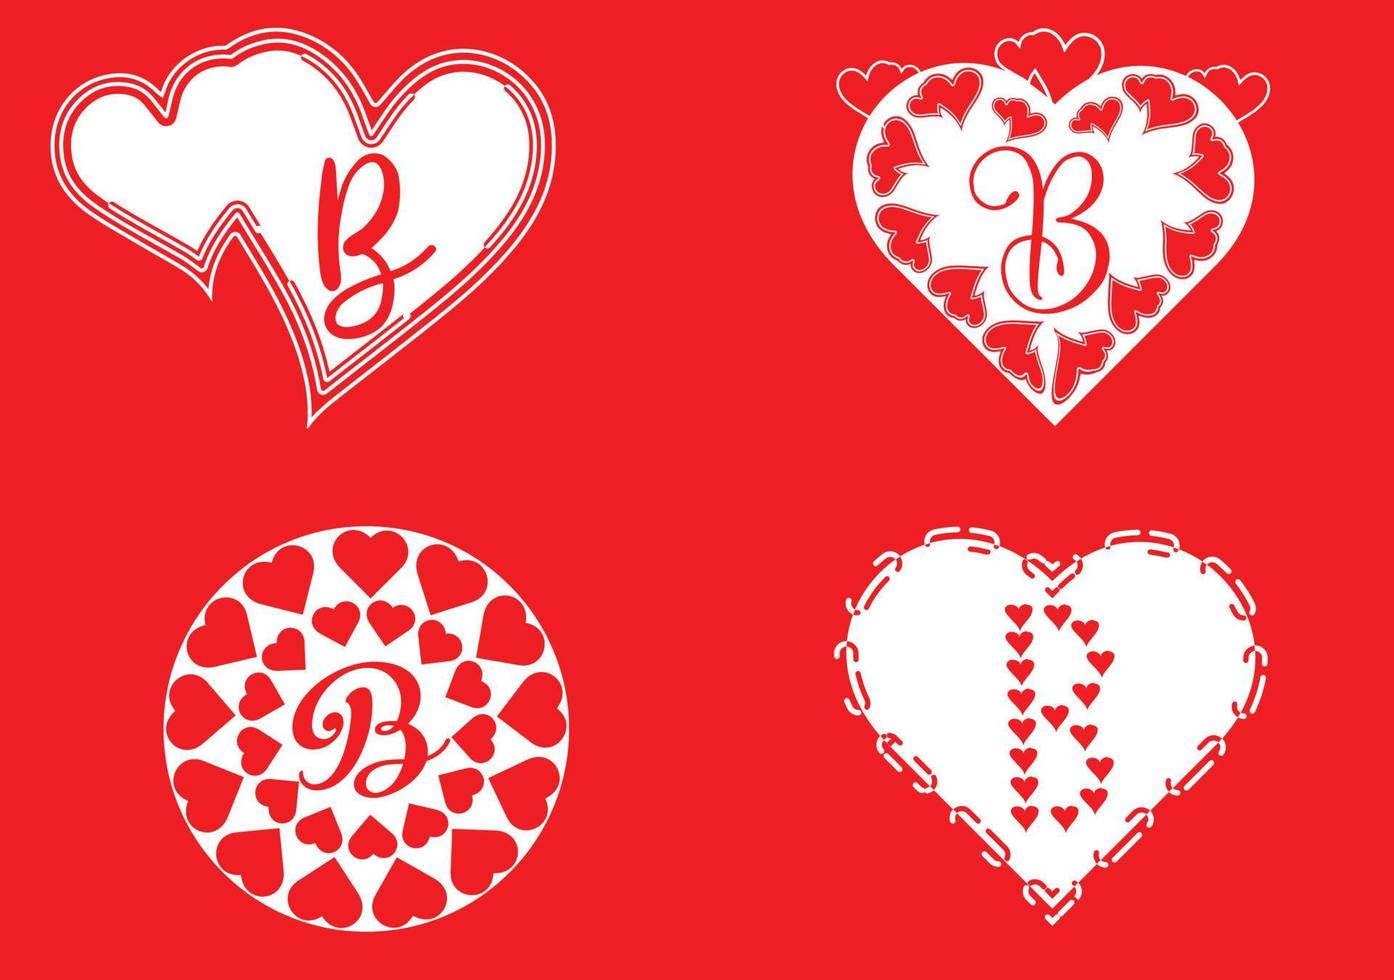 B letter logo with love icon, valentines day design template vector